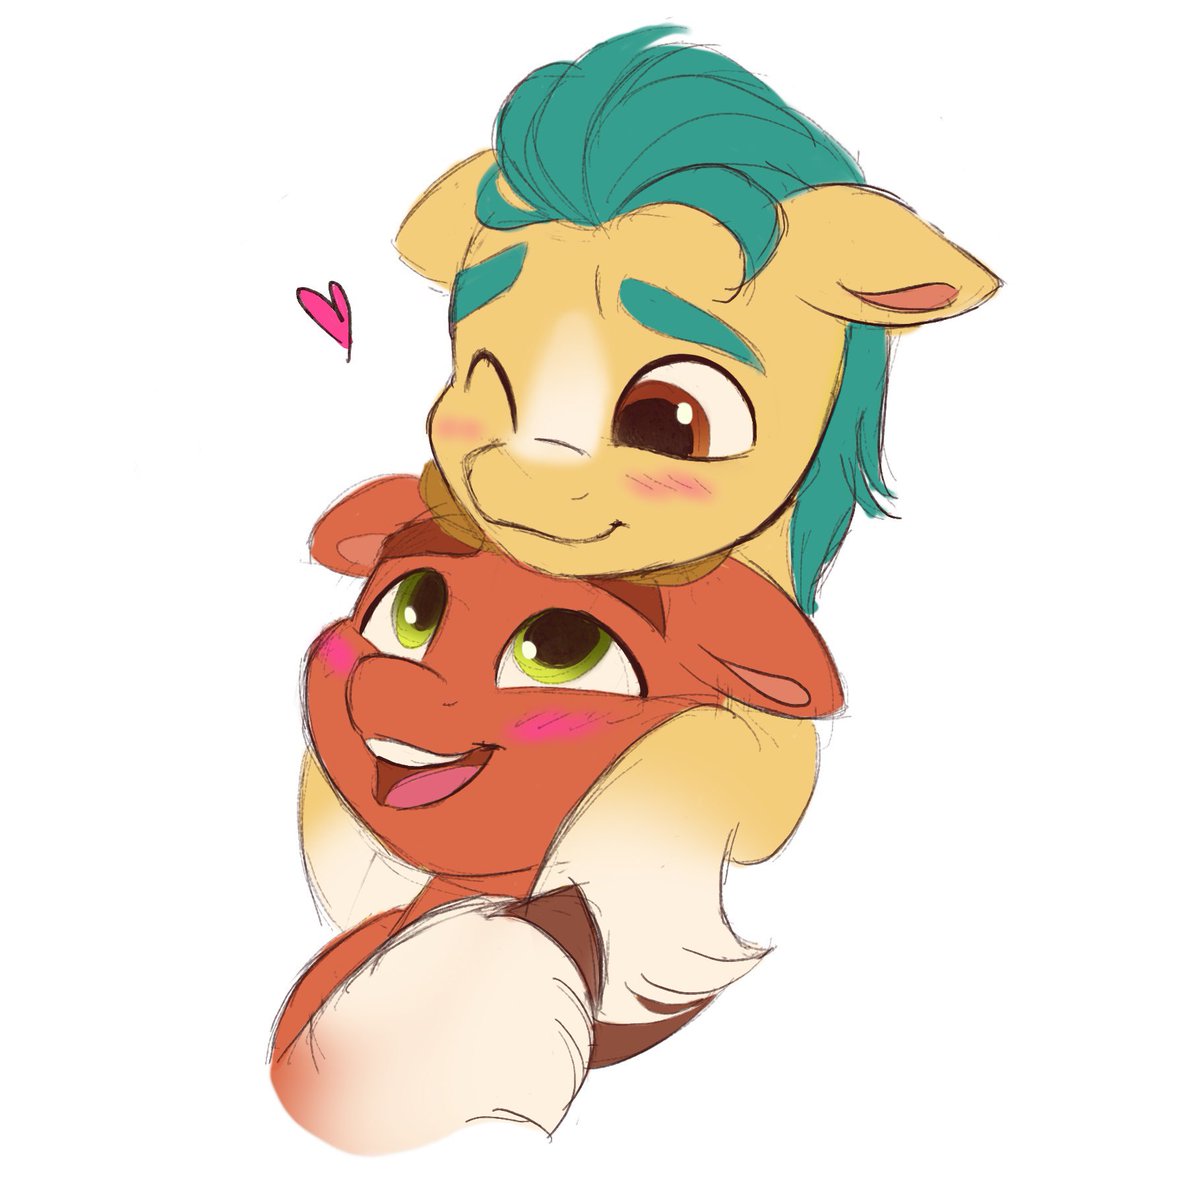 Quick iPad doodle for Pride month!

#mlp #mylittlepony #bront #PrideMonth